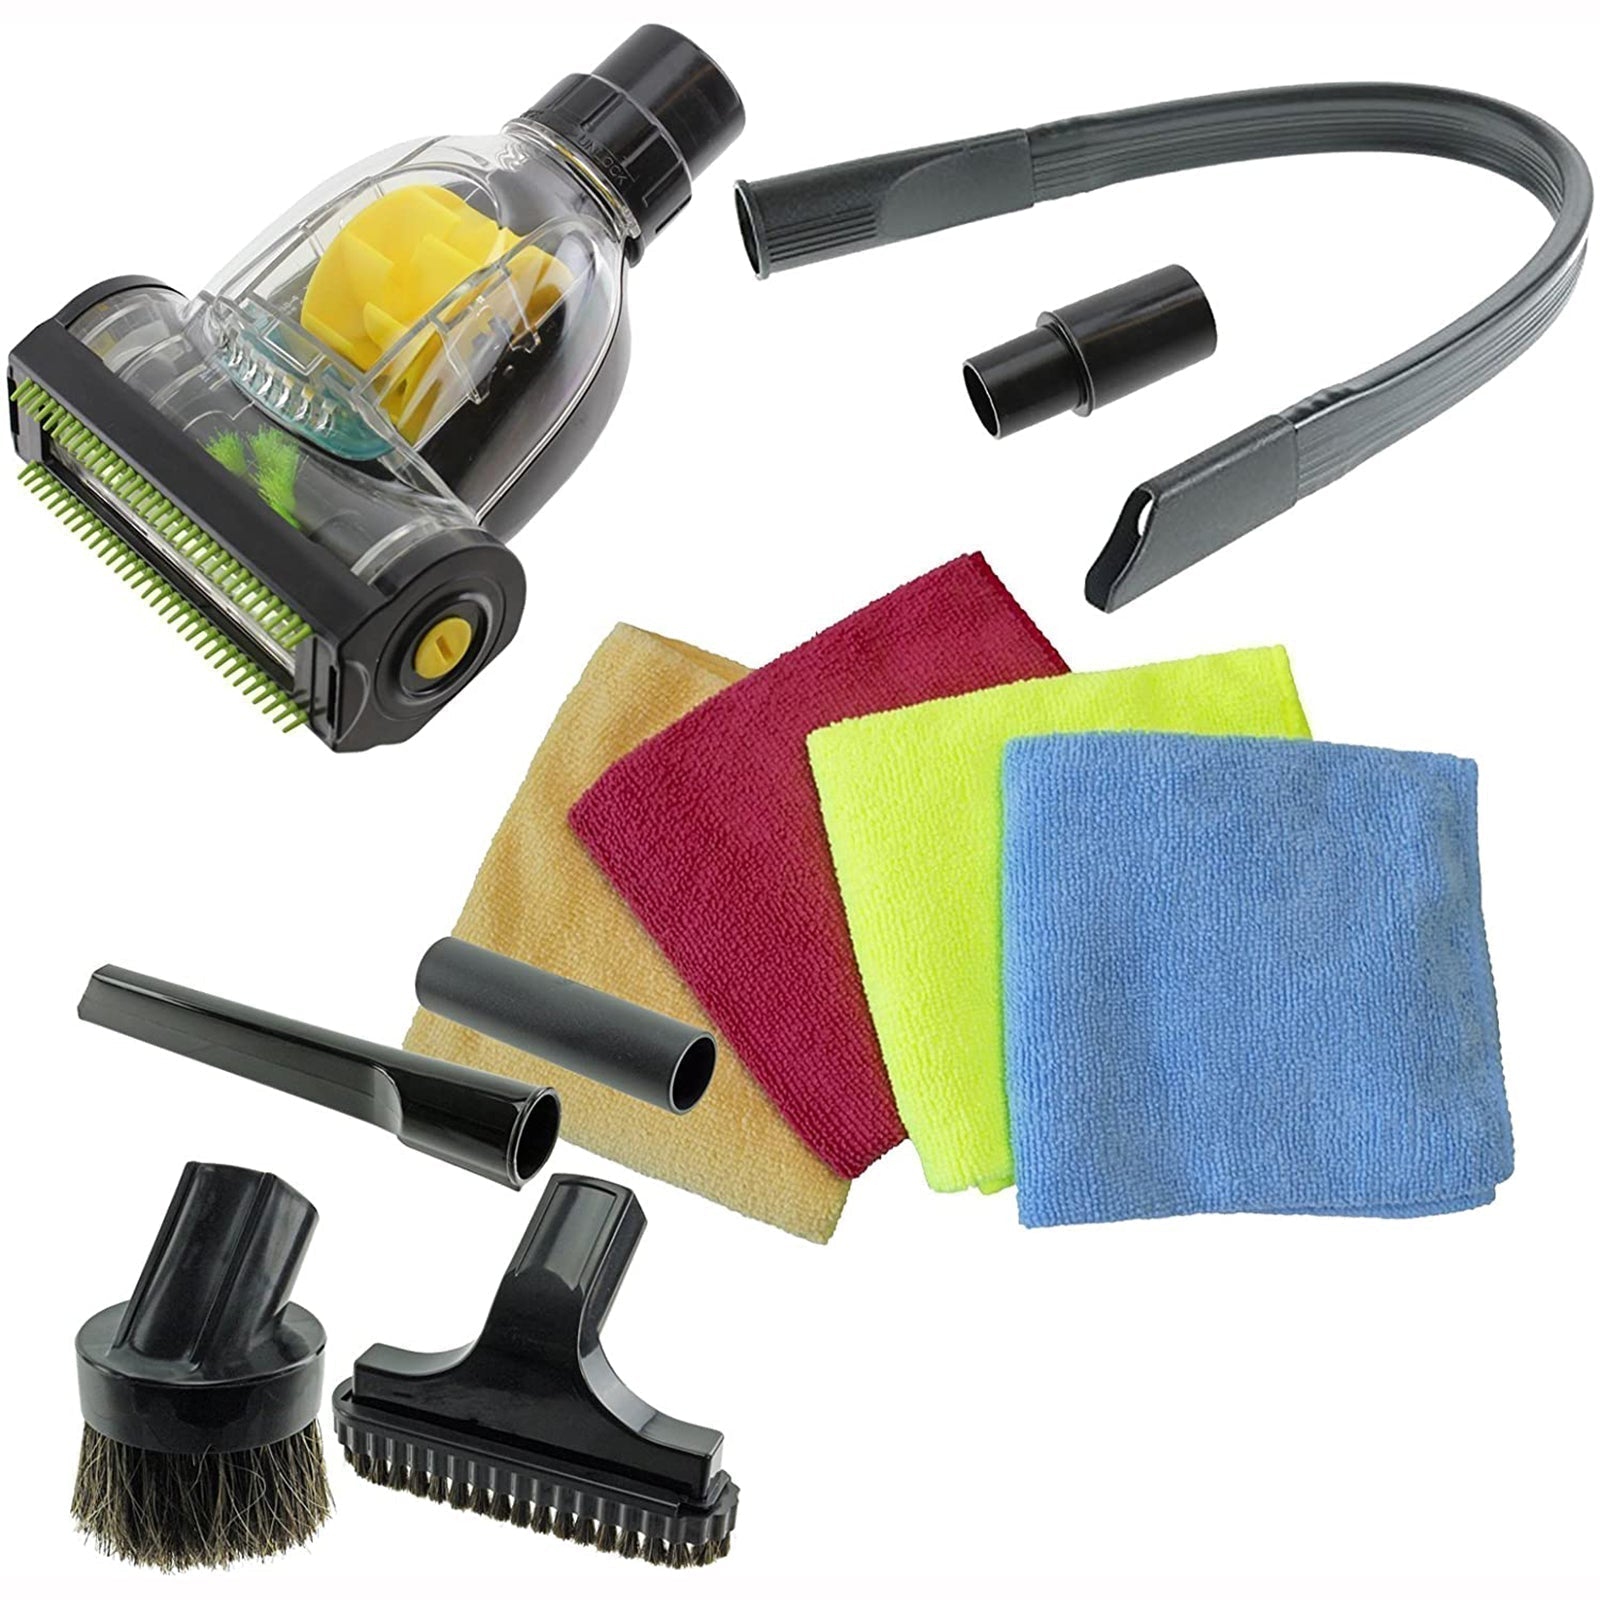 Car Valet Cleaning Tool Kit compatible with AEG Vacuum Cleaner (32mm/35mm)